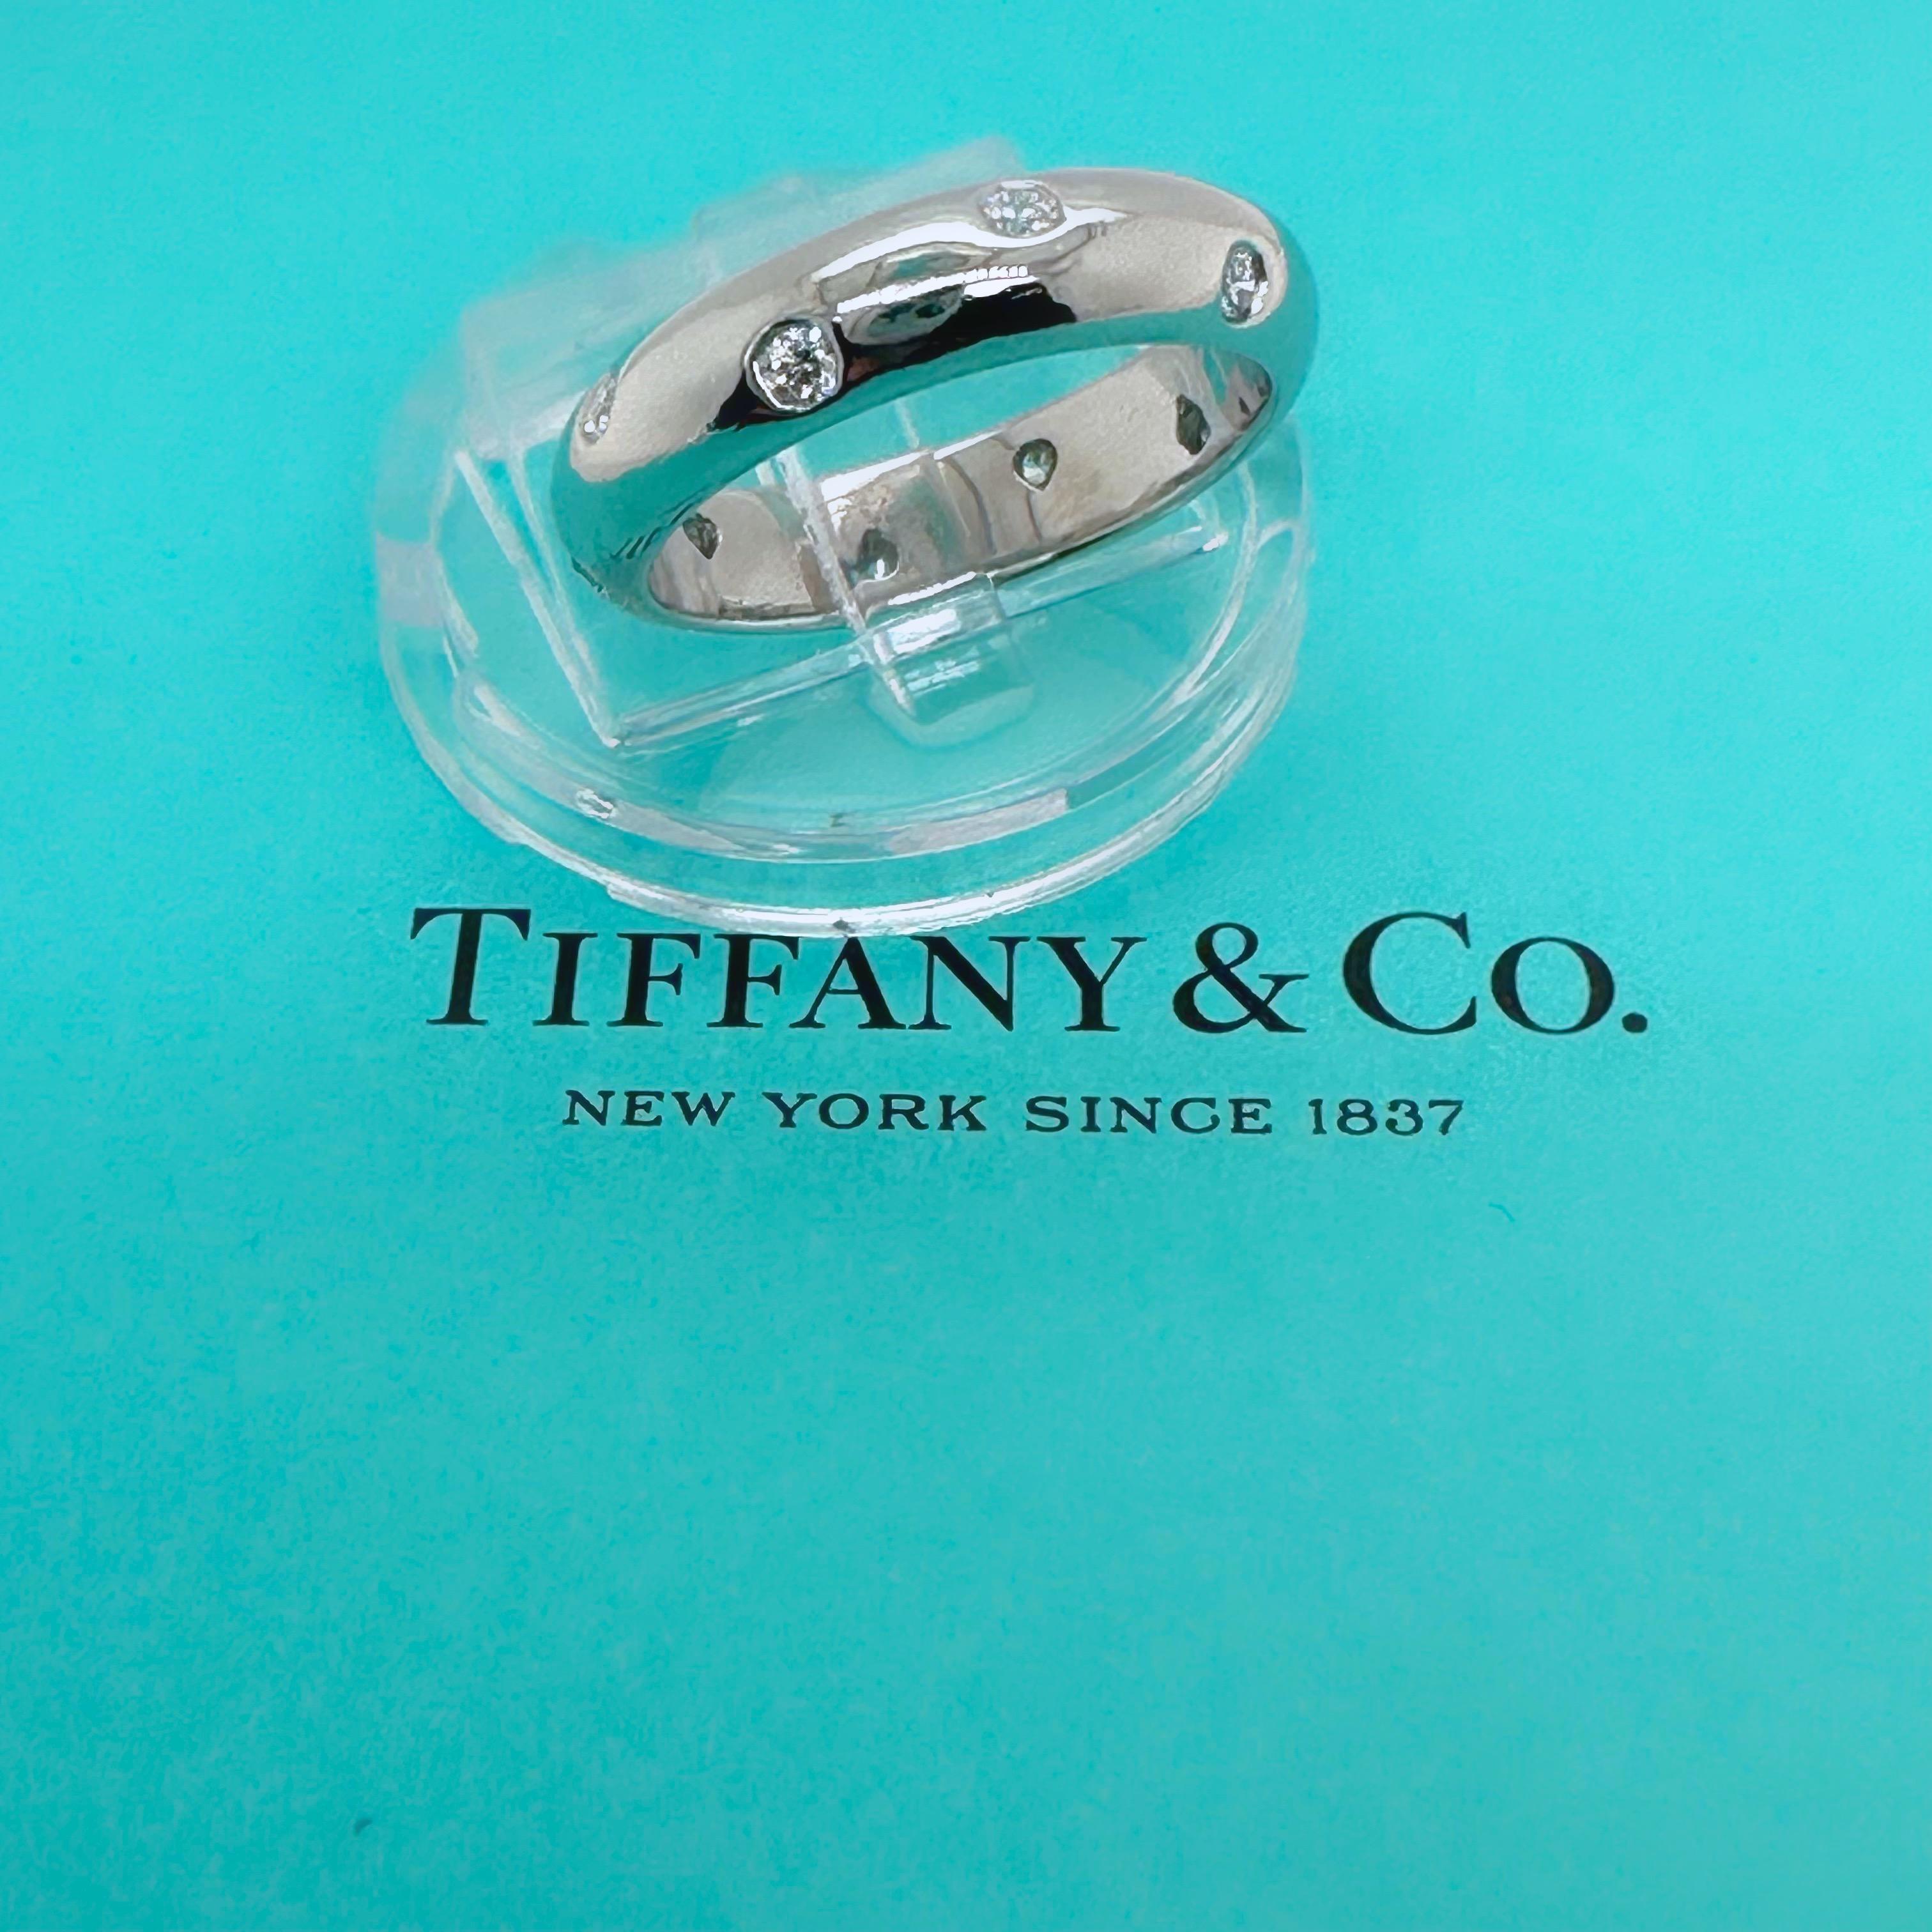 Tiffany & Co. ETOILE Diamond Band Ring 
Style:  Band
Ref. number:  60004786
Metal:  Platinum PT950
Size:  6.0
Measurements:  4.6 mm
TCW:  0.22 tcw
Main Diamond:  10 Round Brilliant Diamonds
Hallmark:  ©TIFFANY&CO. PT950
Includes:  T&C Jewelry Pouch